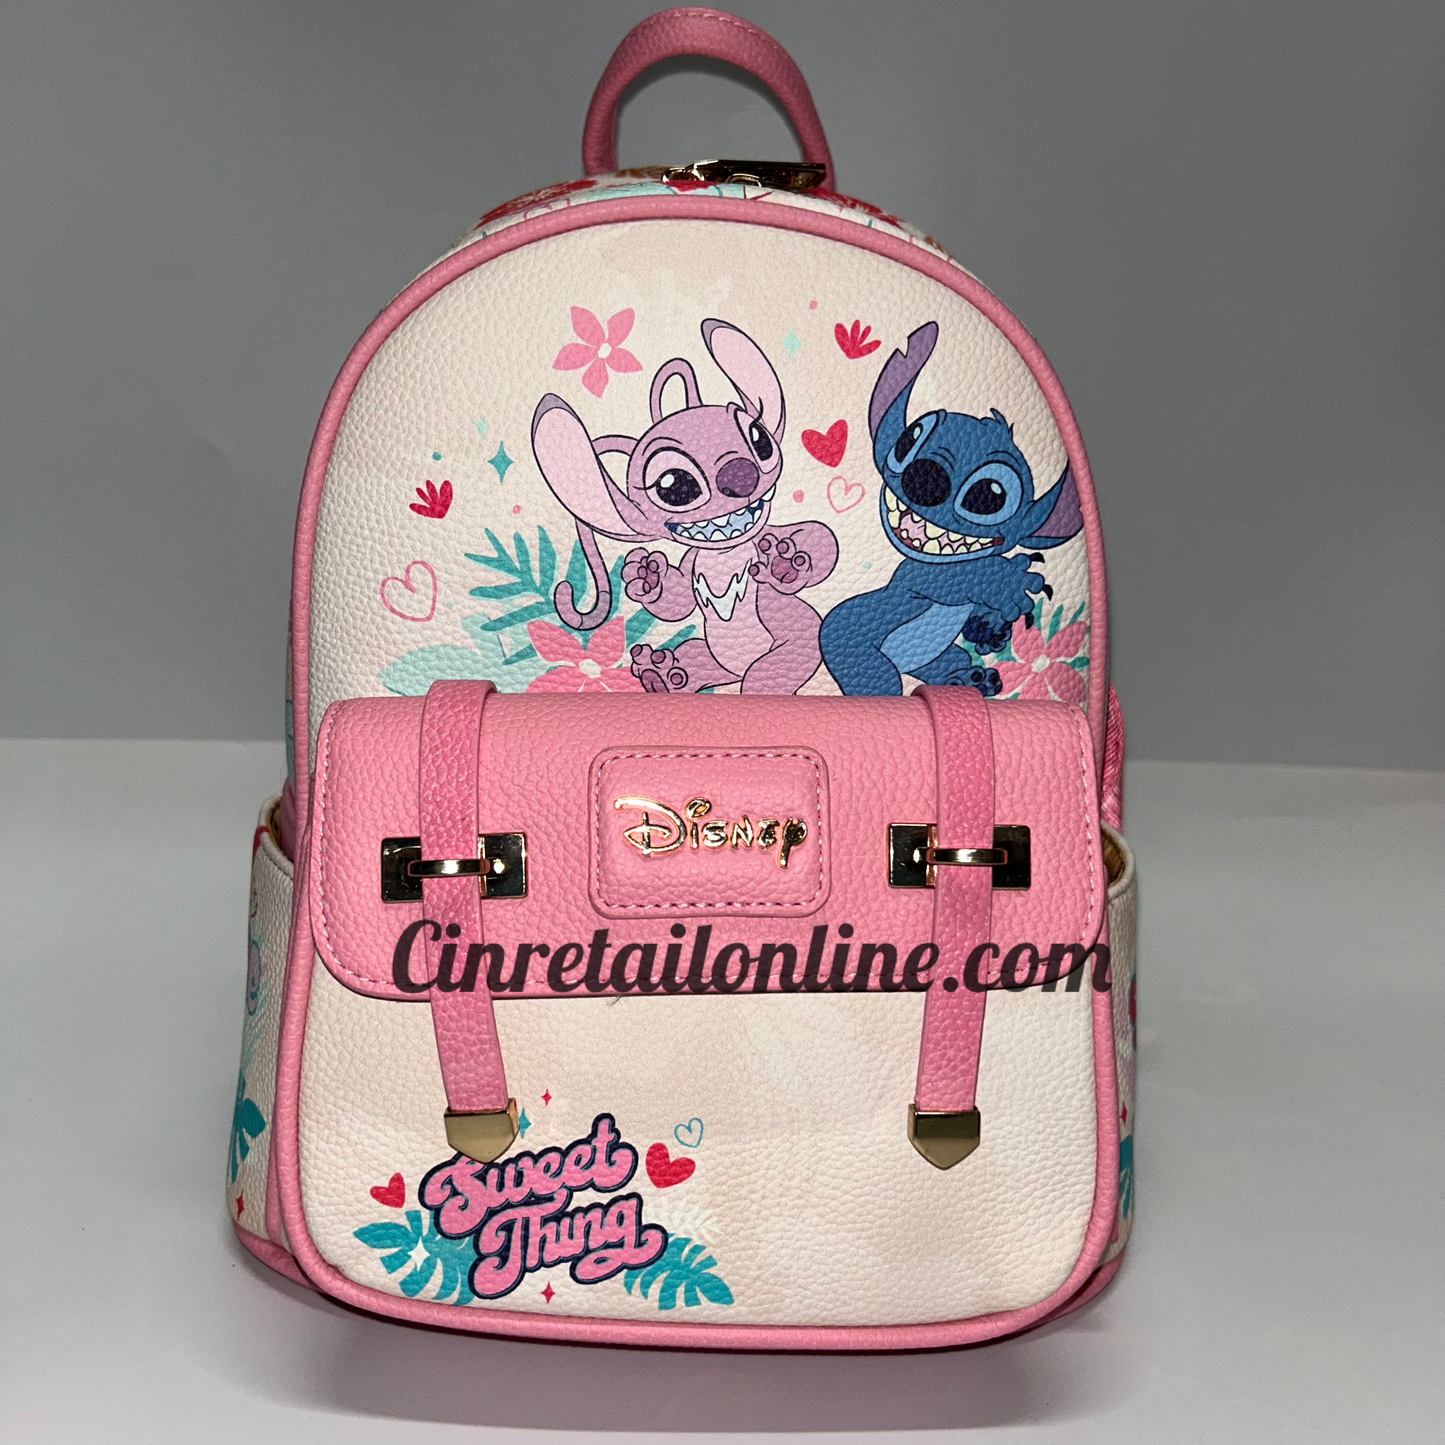 Stitch and Angel Disney backpack